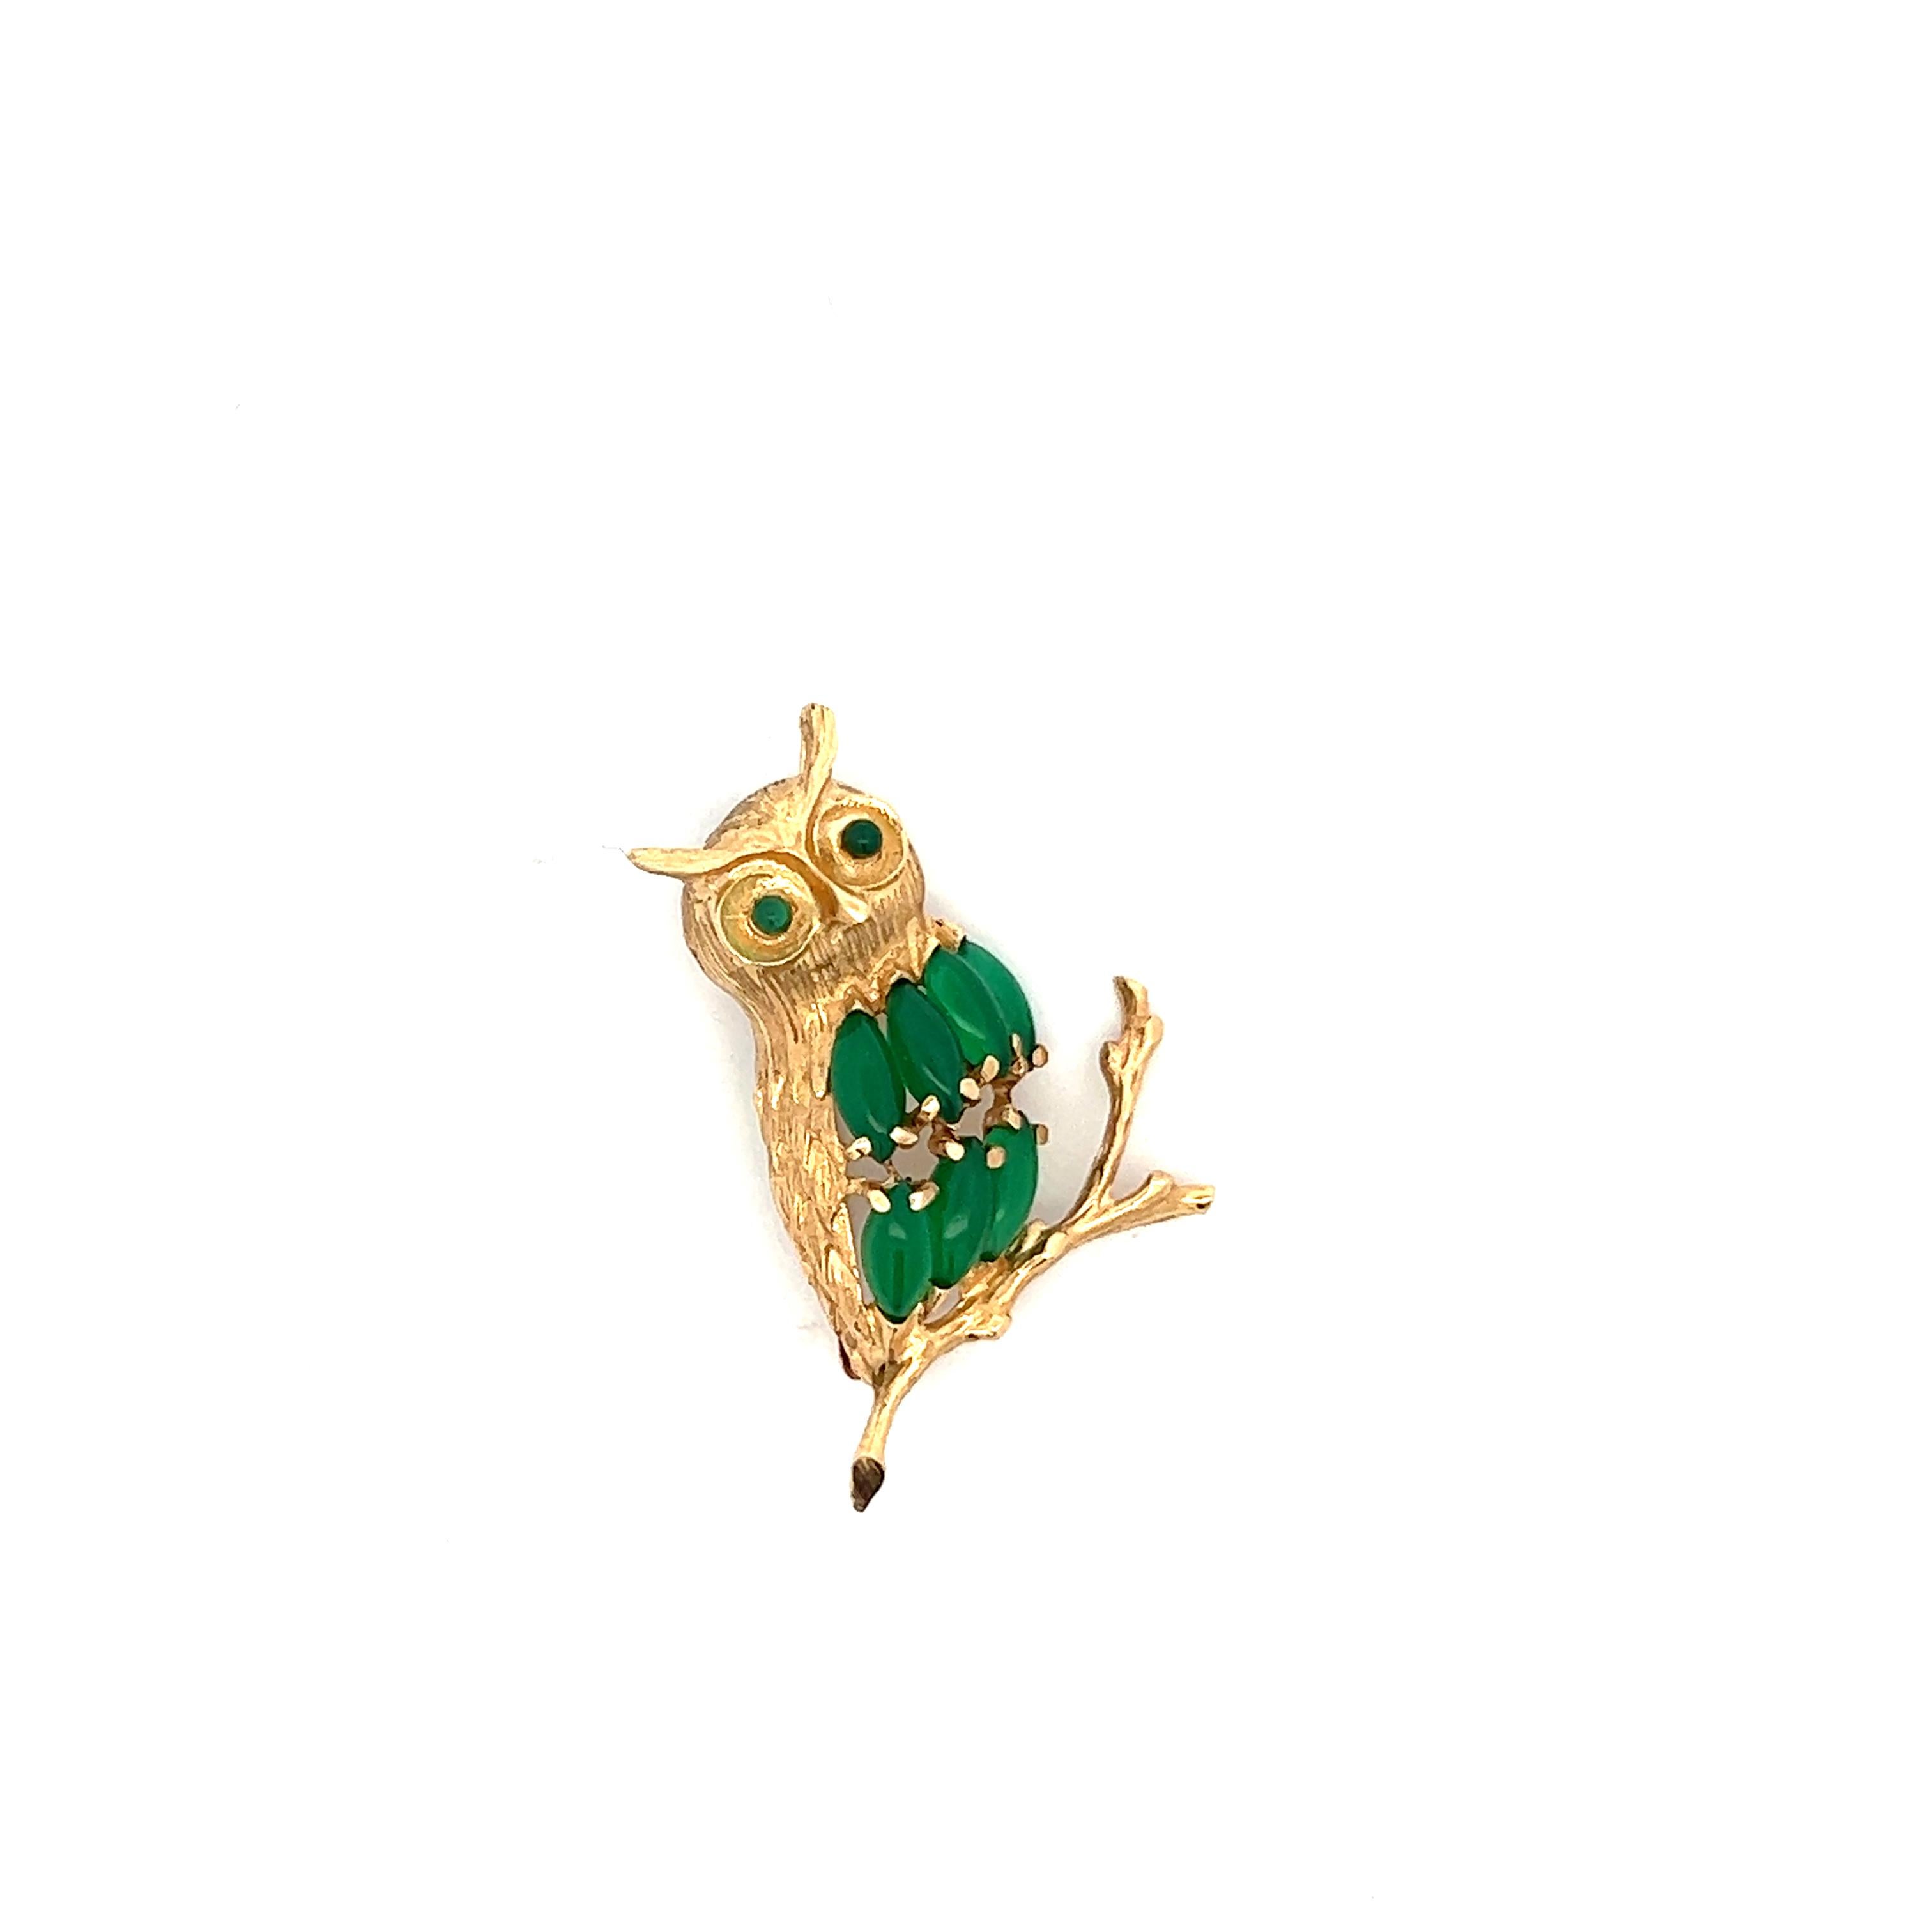 Contemporary 14K Yellow Gold Owl Pin with Chalcedony Body and Eyes  For Sale